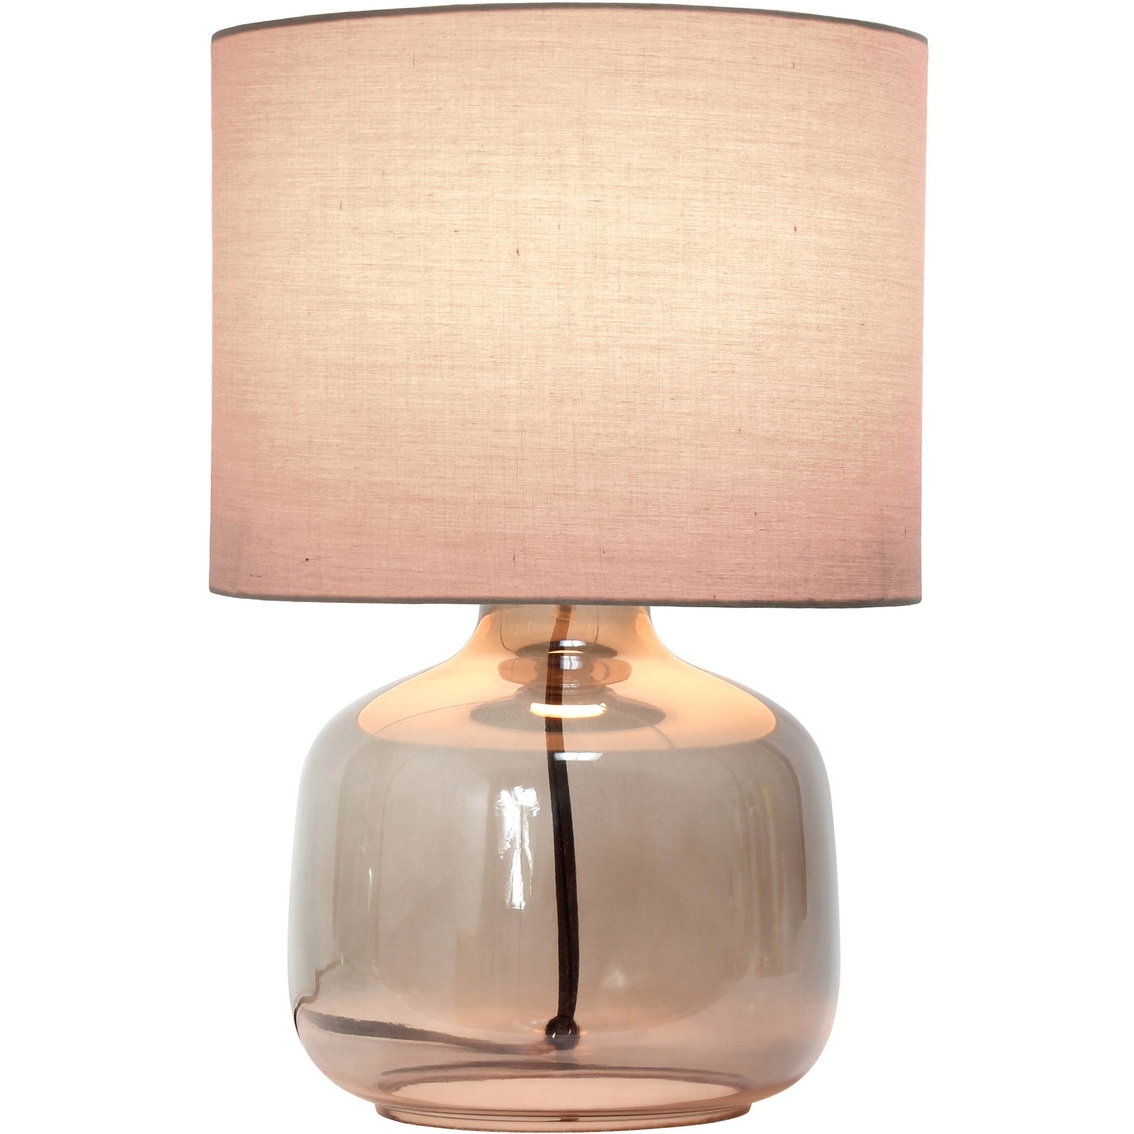 Simple Designs 13 in. Glass Table Lamp - Image 2 of 8